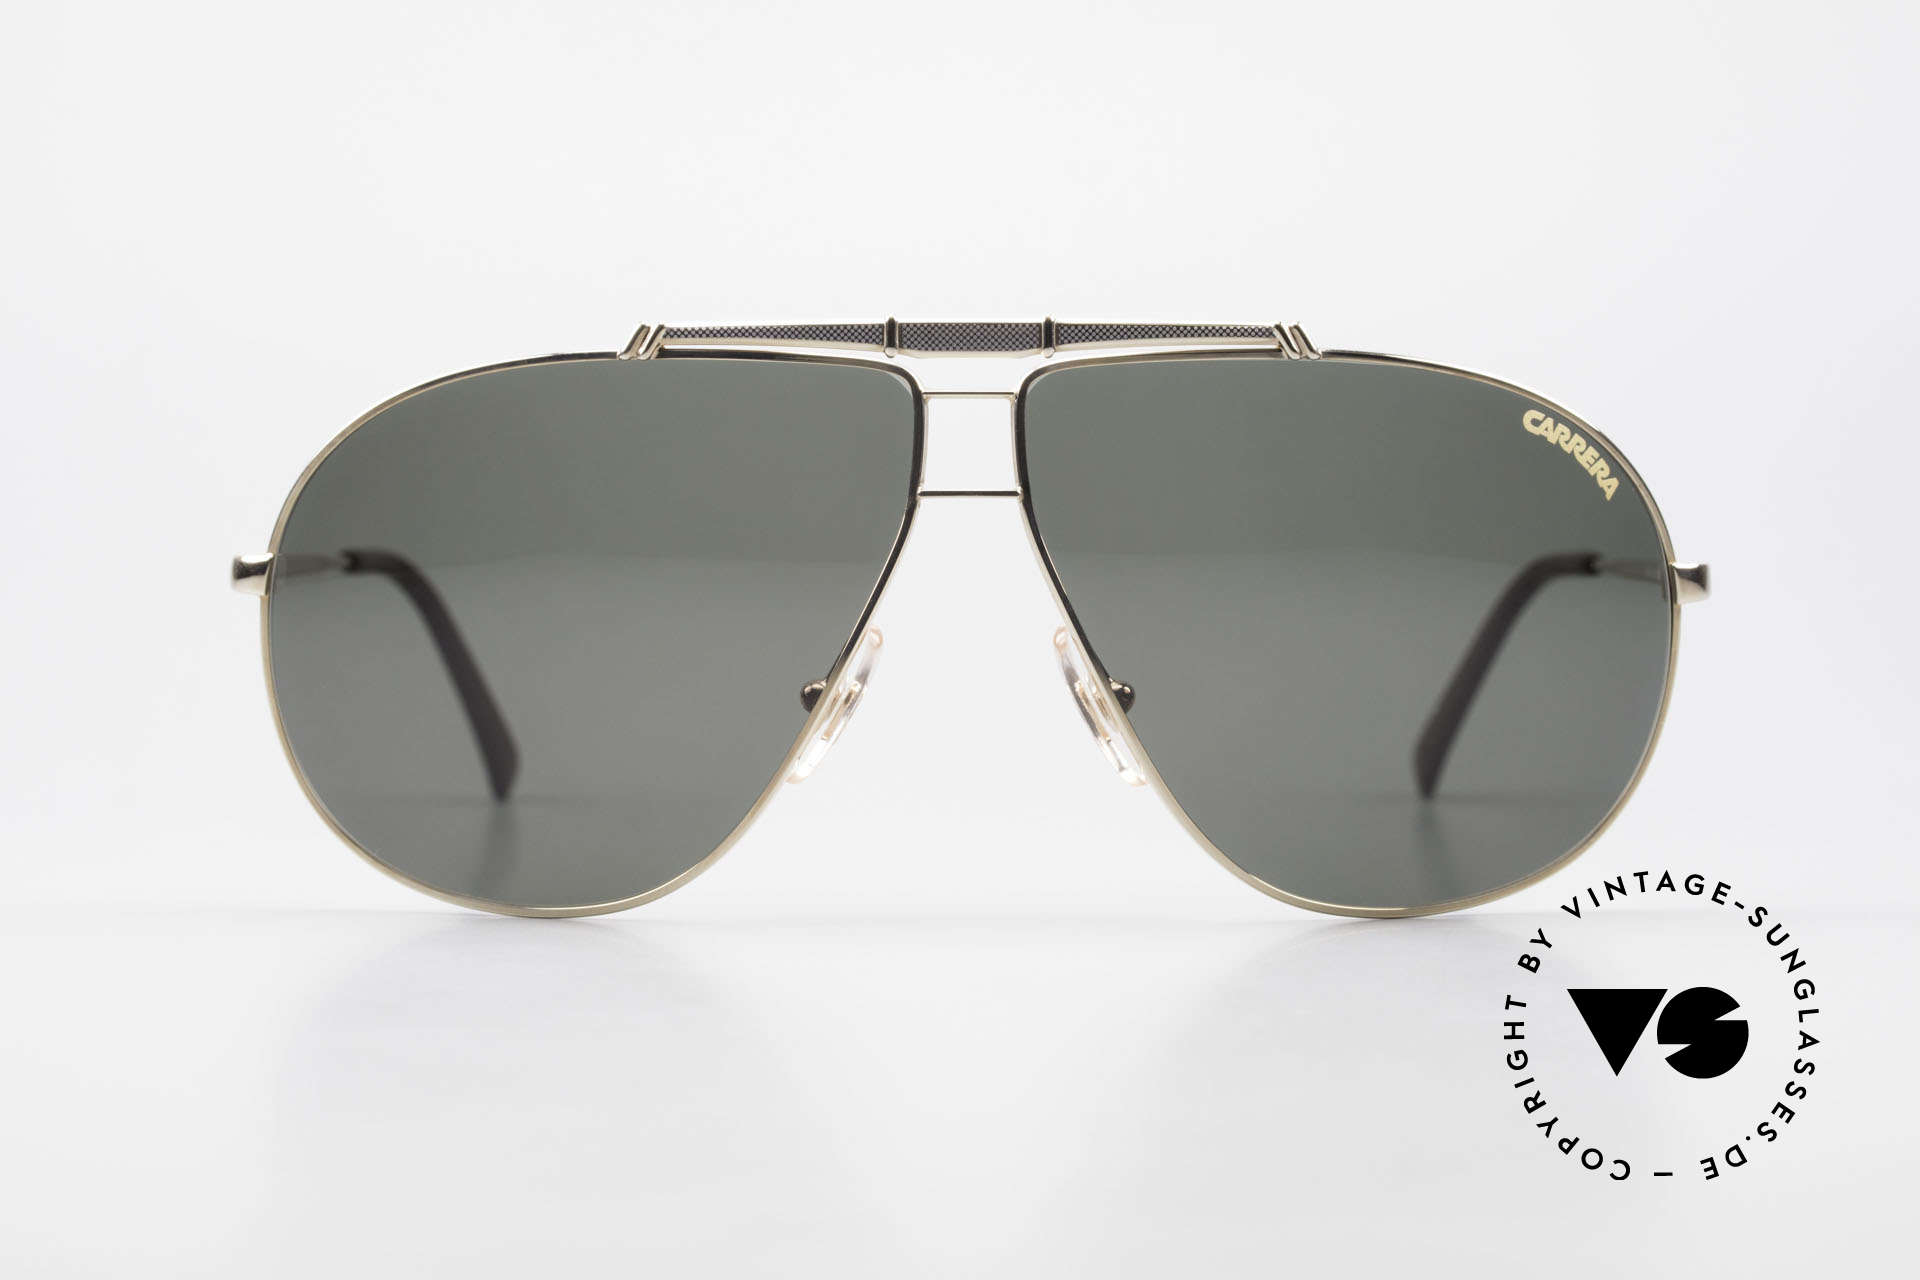 Carrera 5401 Large Aviator Shades Extra Lenses, mod. 5401 Strato Large, size 64/09, Sport Performance, Made for Men